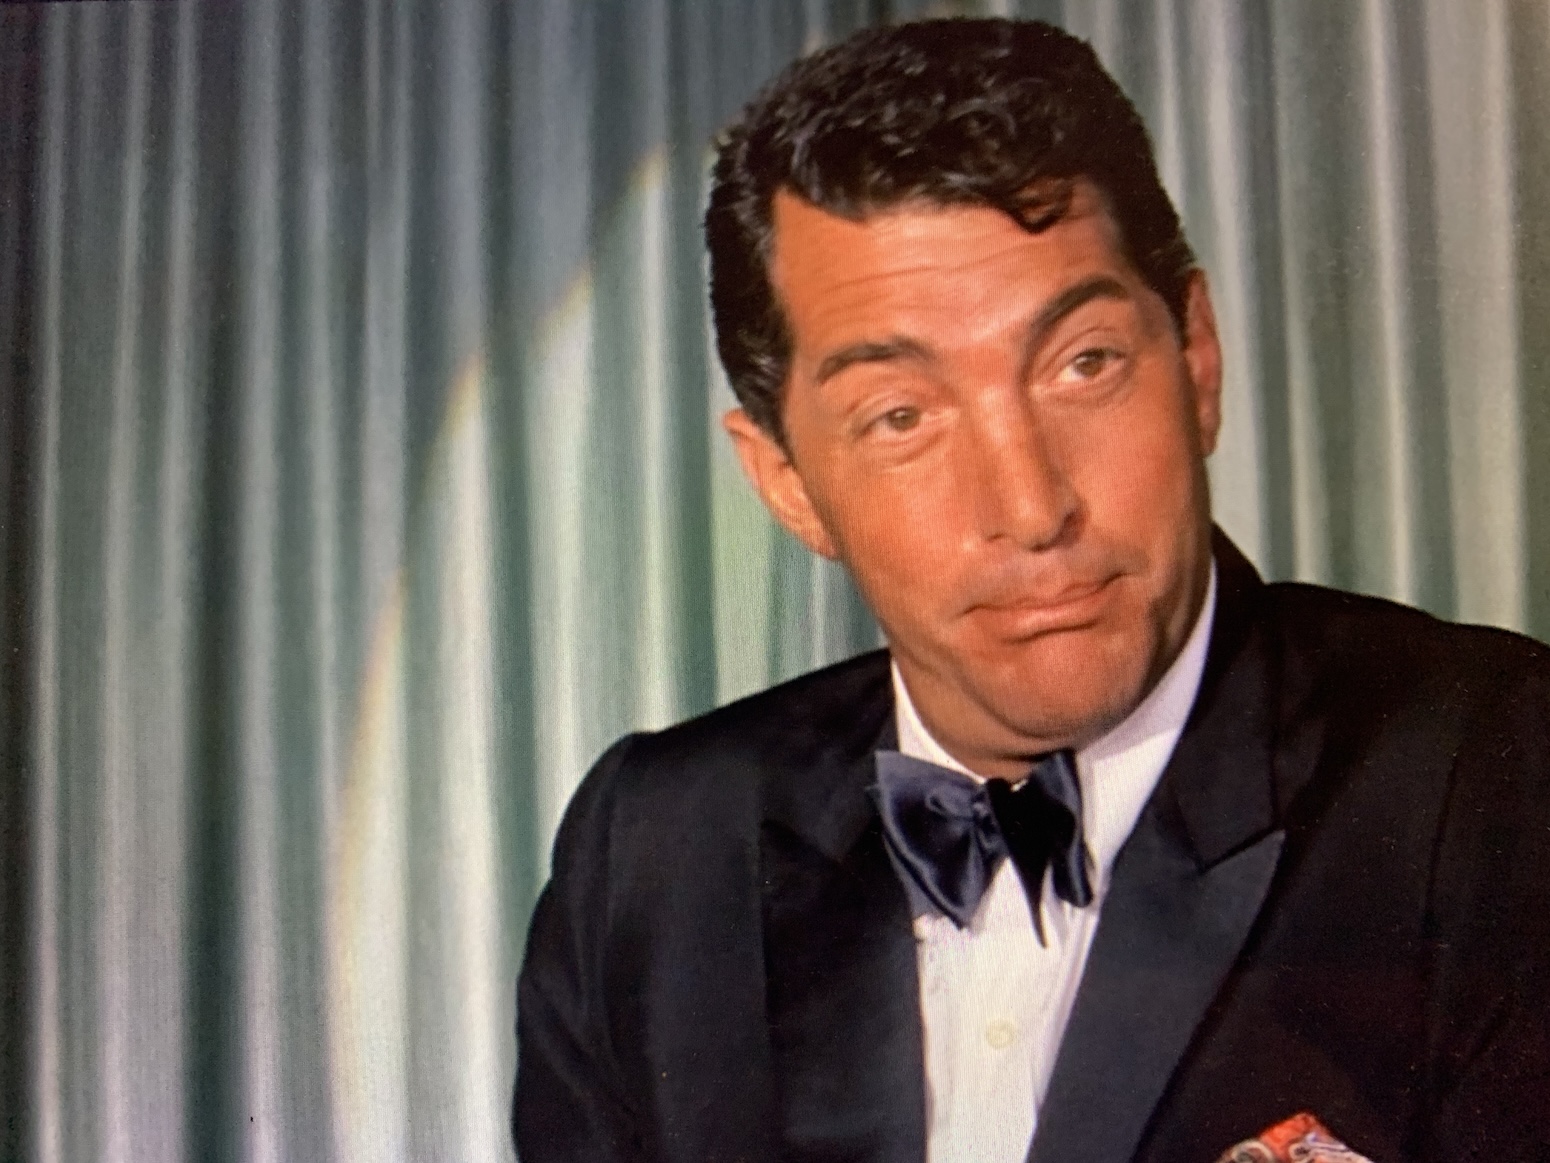 Dean Martin, tanned, shown from mid-chest up in a tuxedo with black bow tie, cocking an eyebrow and wrinkling his mouth. The edge of the spotlight shining on him shows on the gray-green curtain hanging behind him. 